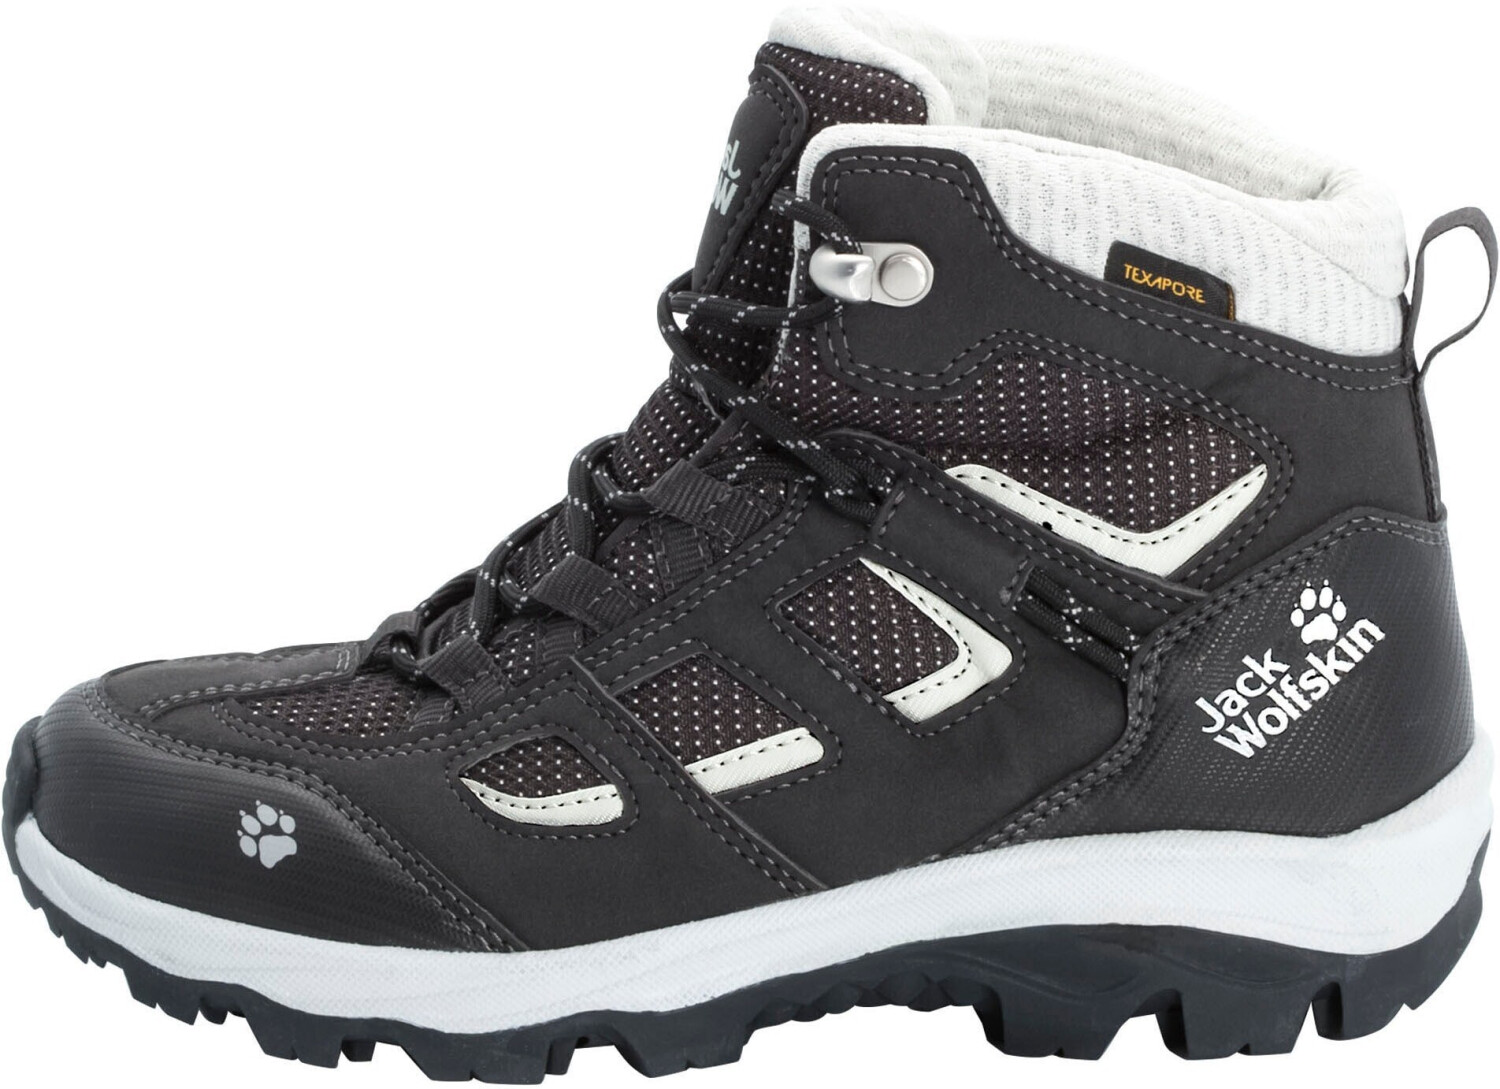 Buy Jack Wolfskin Vojo Texapore Mid Kids (4042181) from £34.94 (Today) –  Best Deals on